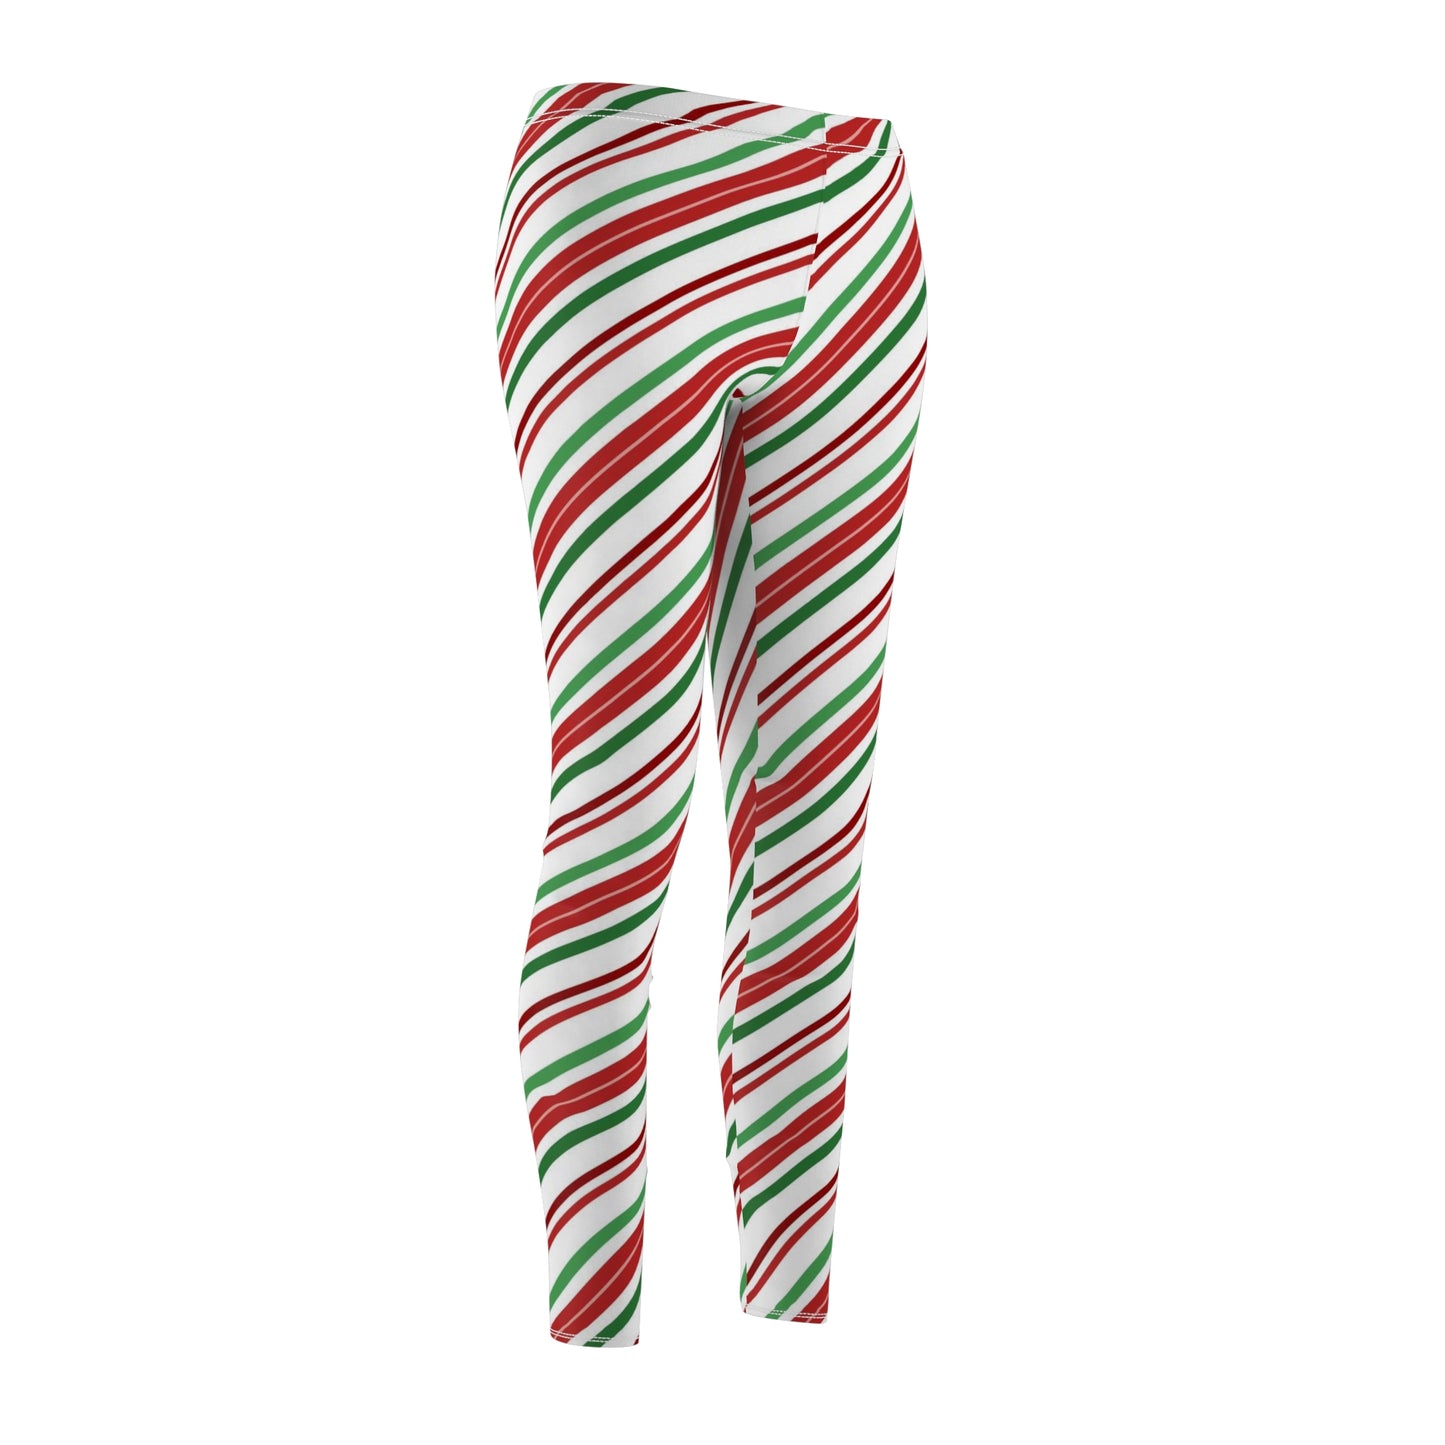 Candy Cane Christmas Leggings Women, Red White Green Striped Holiday Xmas Elf Costume Festive Peppermint Tights Fitted Ladies Yoga Pants